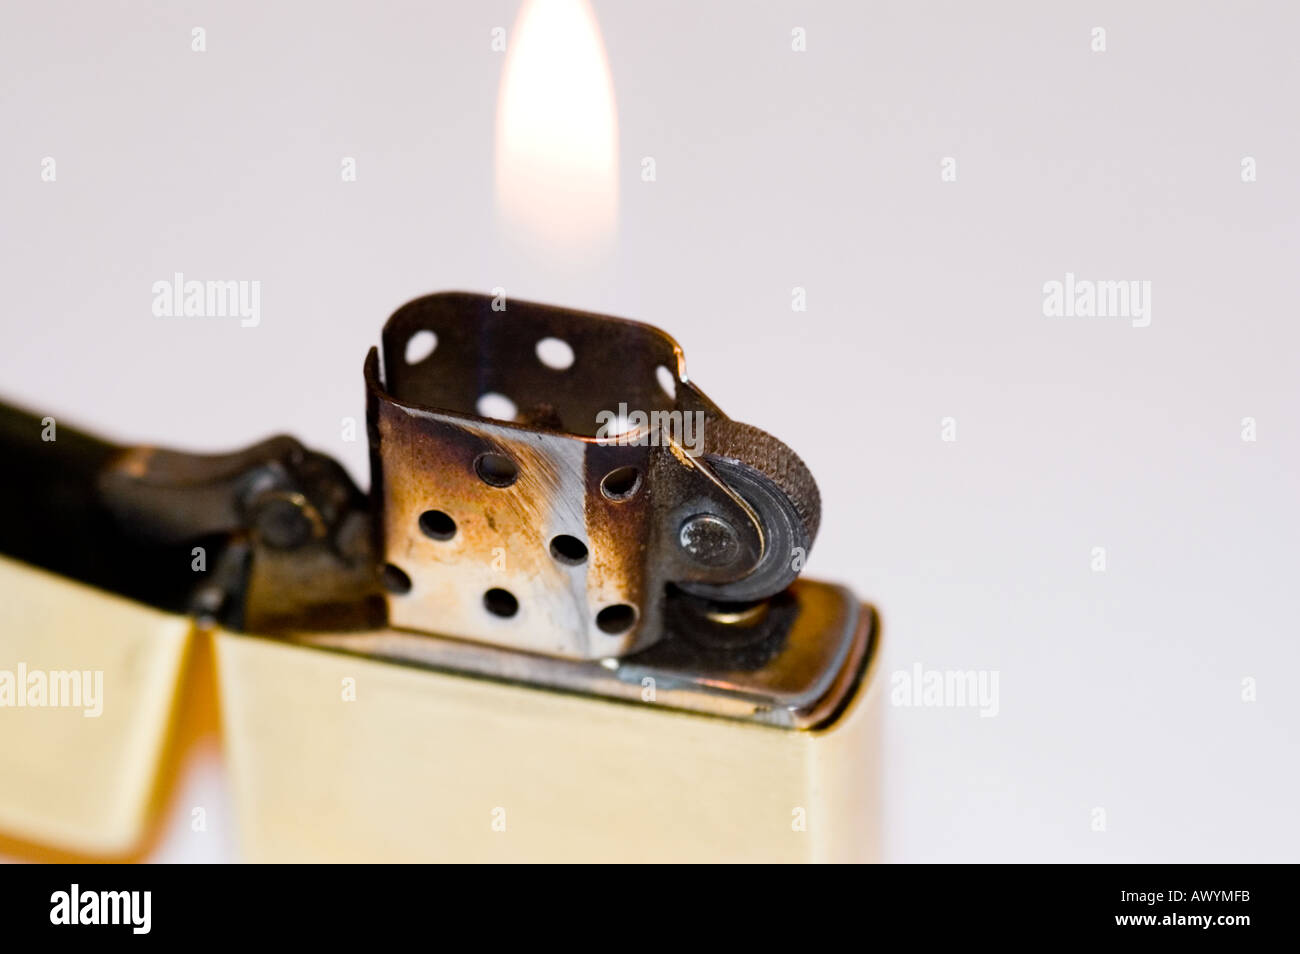 Lit zippo lighter showing brass casing and flame Stock Photo